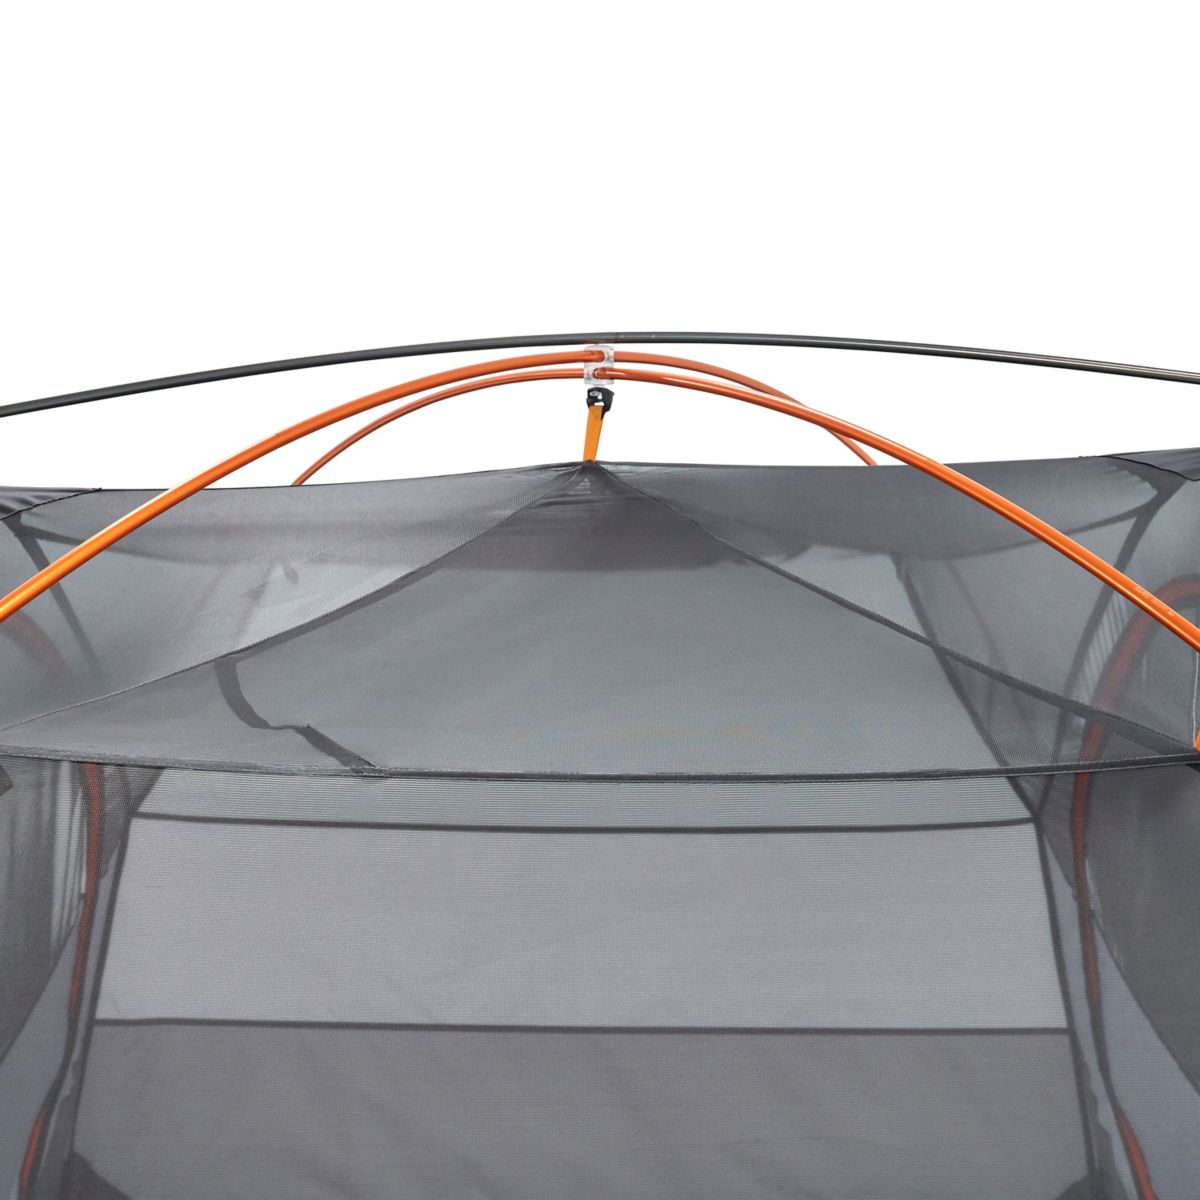 Limelight 2-Person Tent